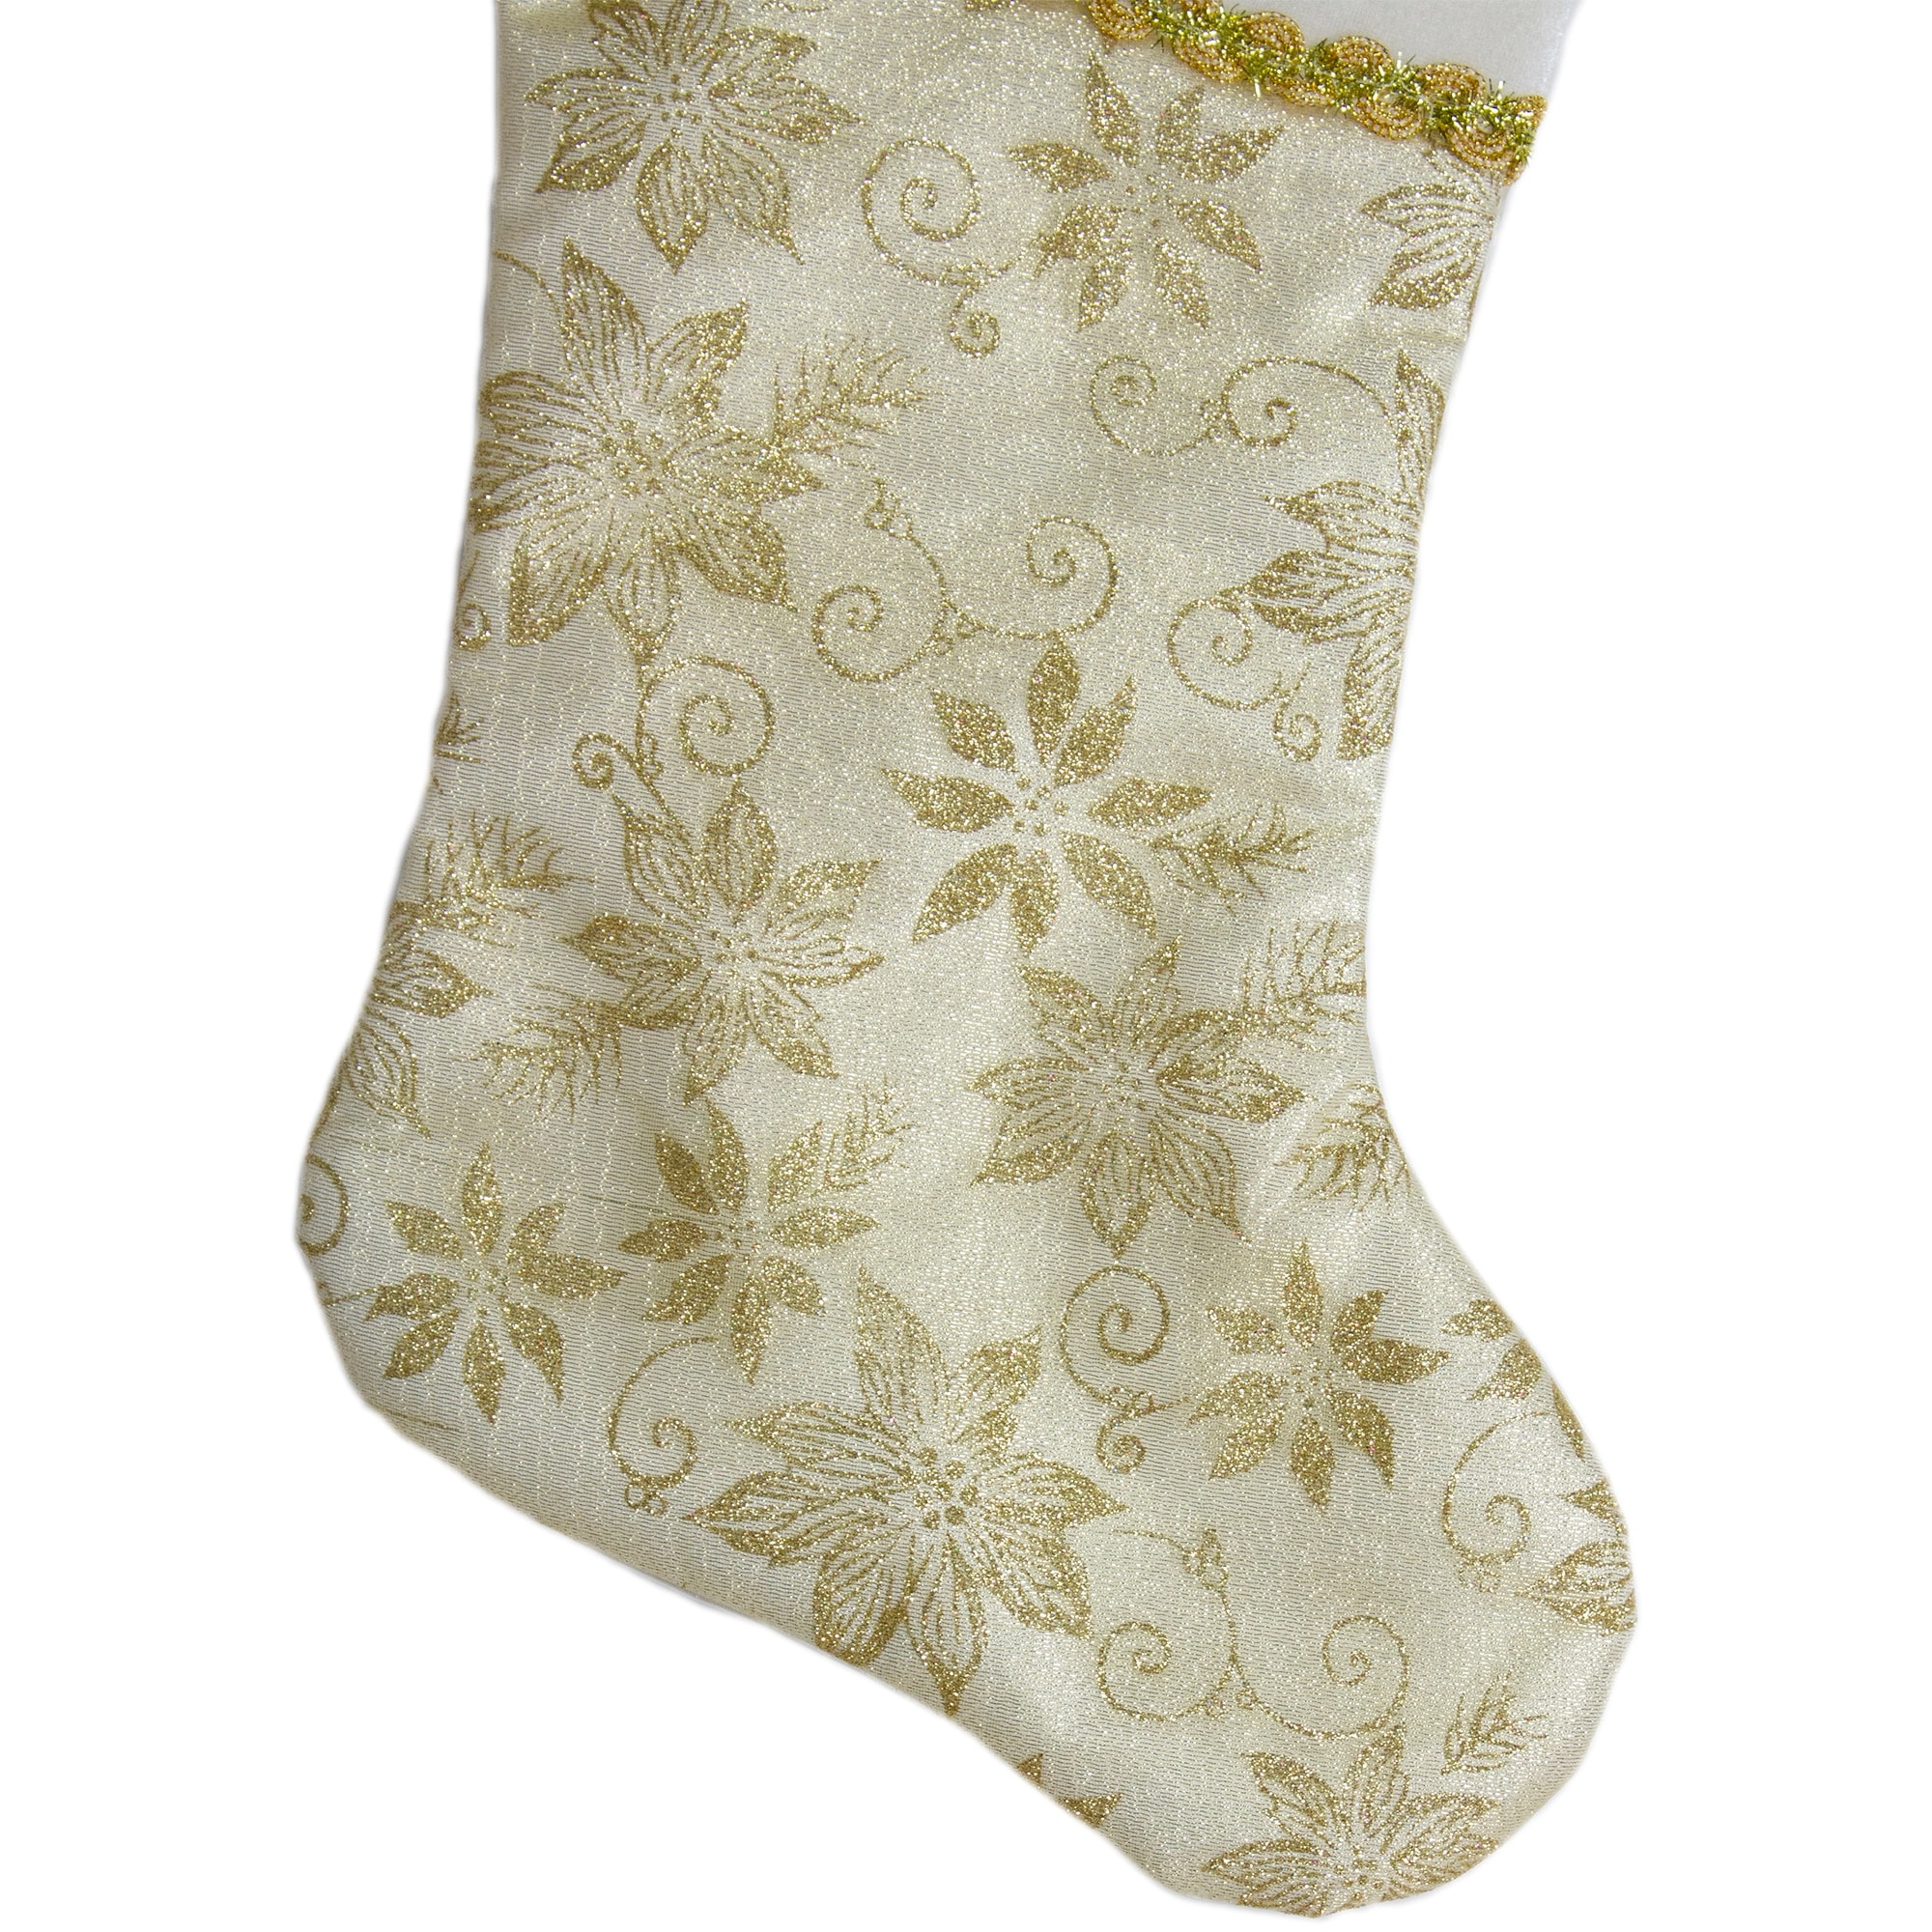 21 Inch White Velveteen Stocking With Silver Snowflakes